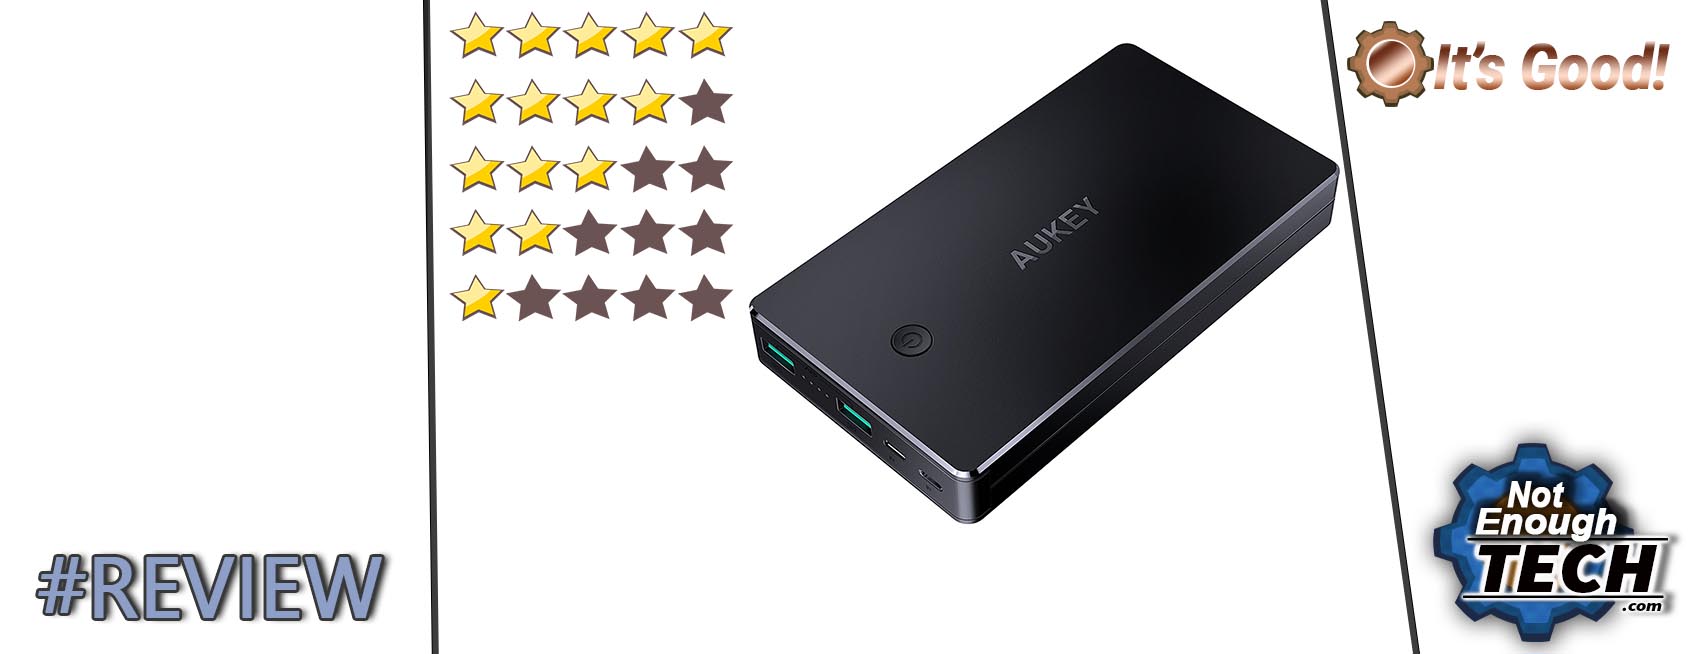 AUKEY power bank some - - NotEnoughTech